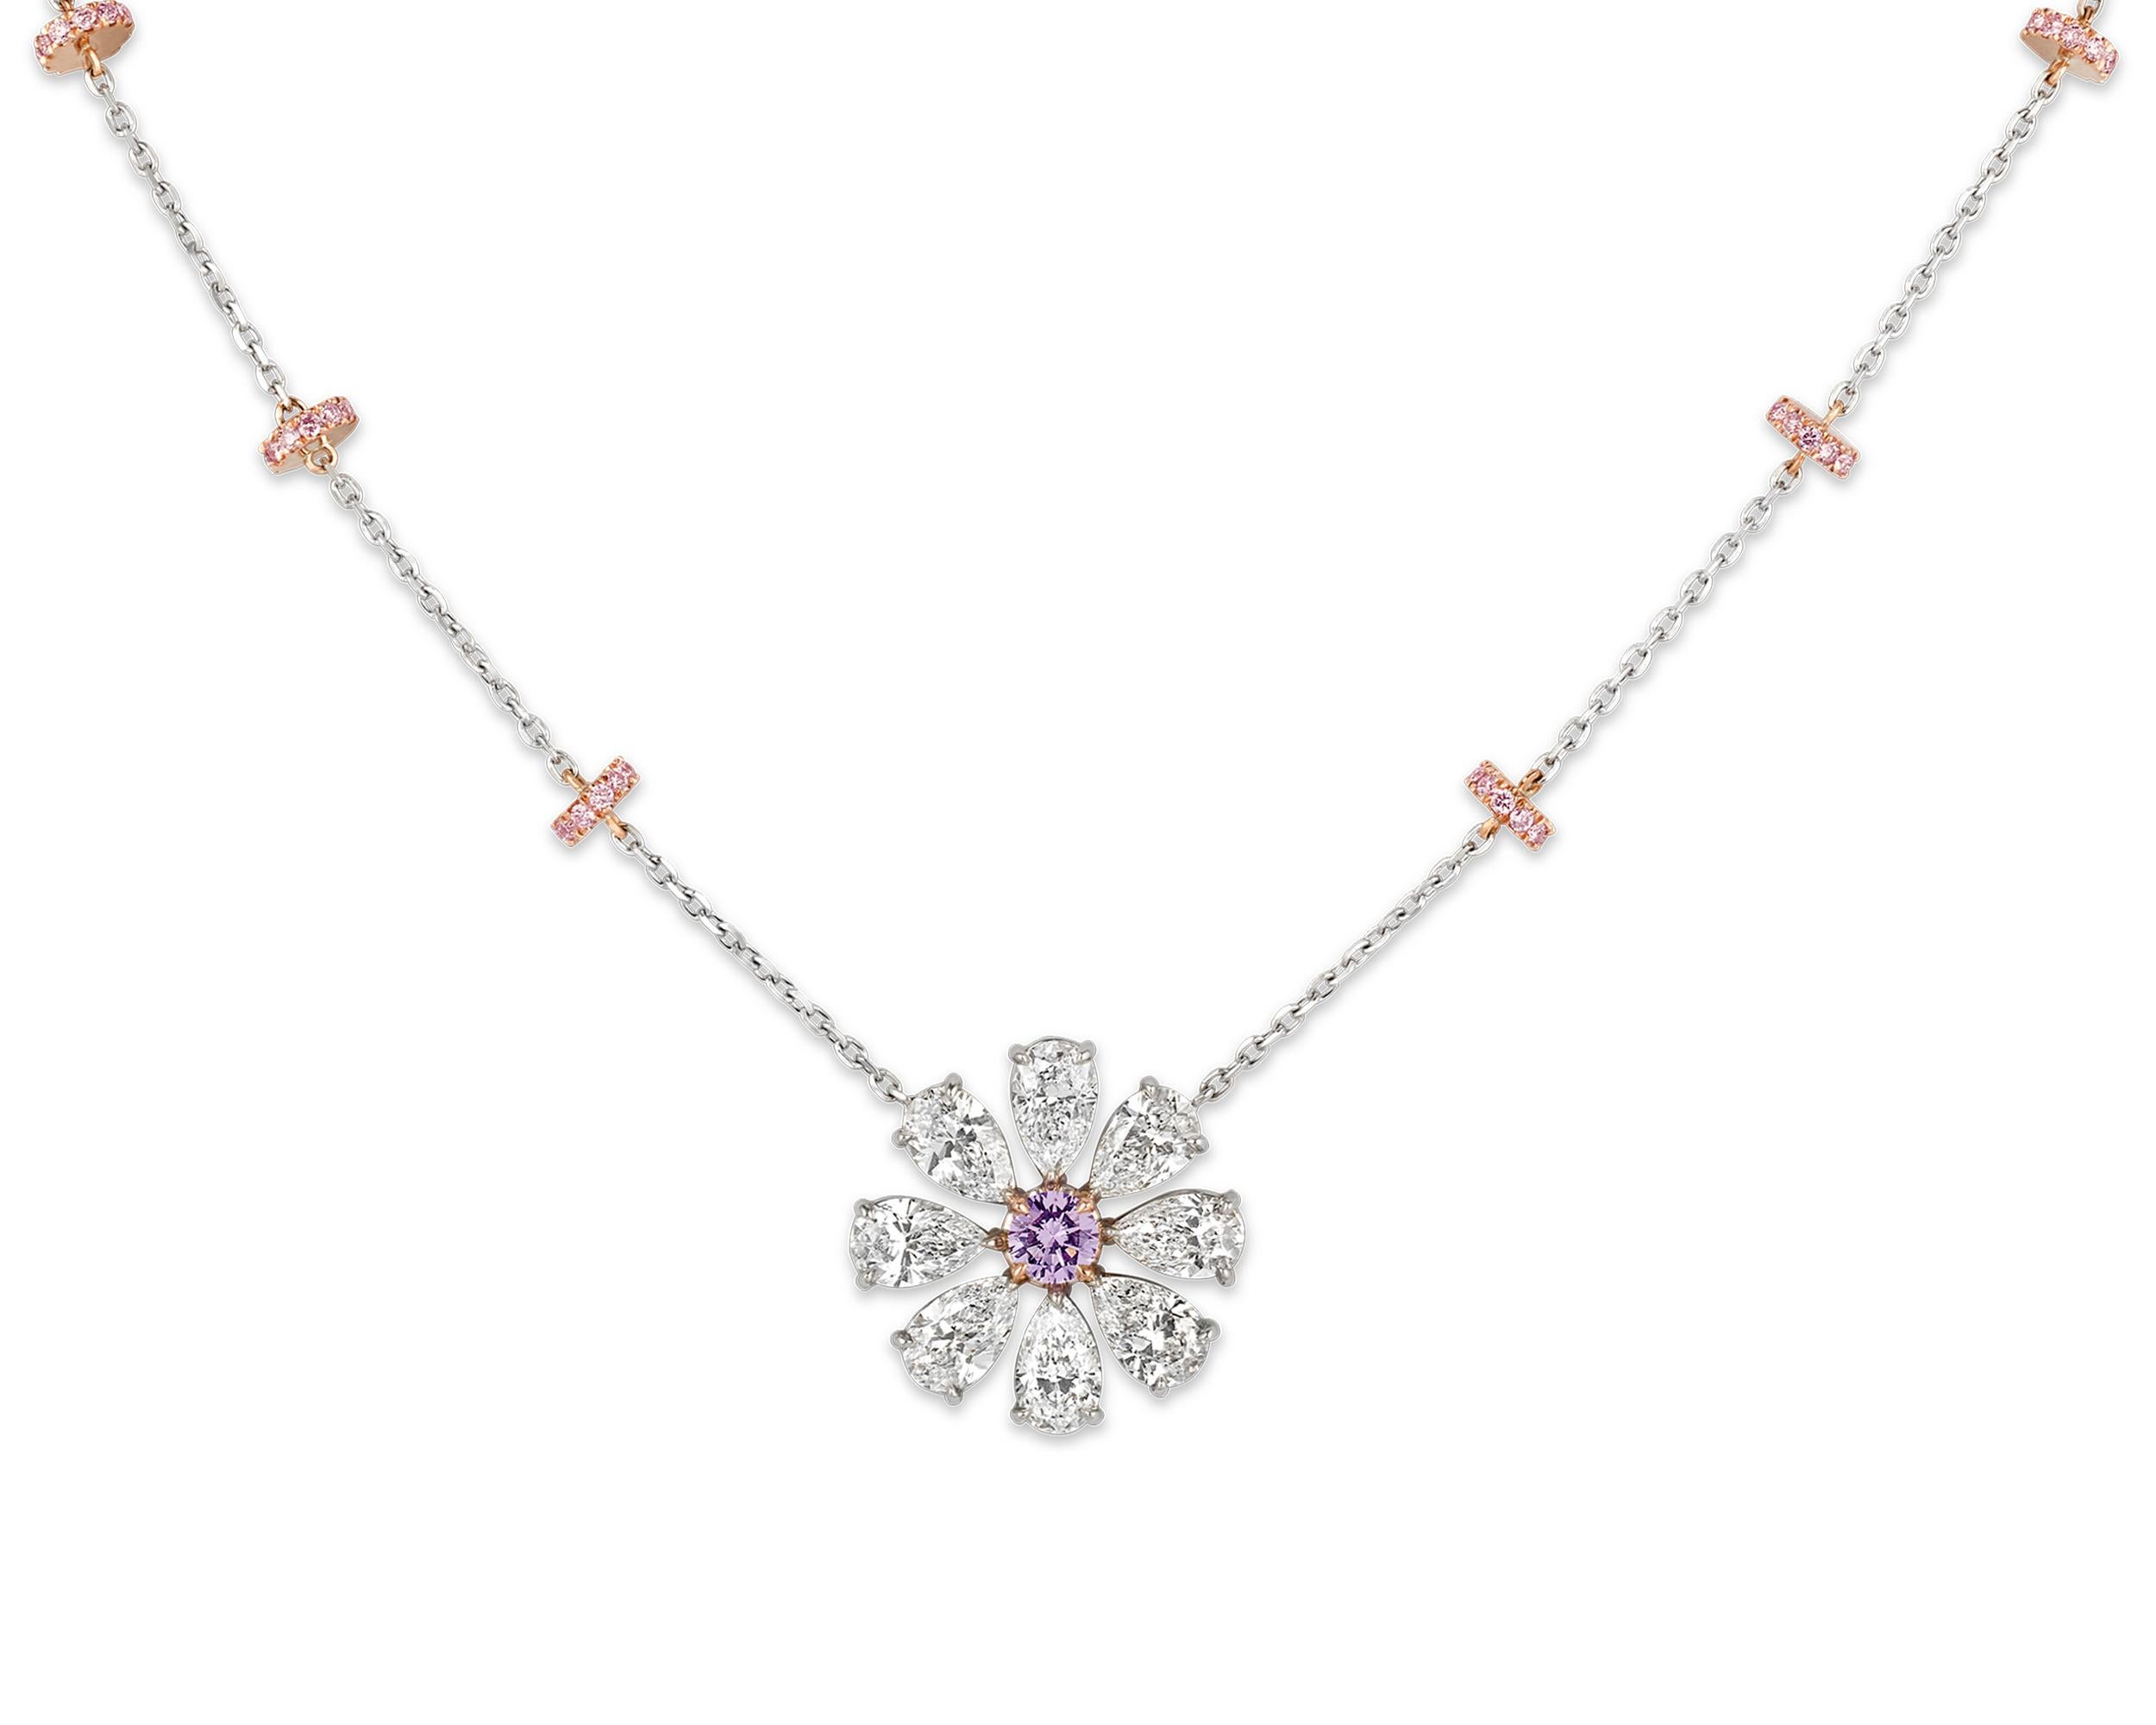 Taking the form of a blossoming flower, this pendant features a 0.28-carat fancy pinkish purple diamond at its center. The remarkable gemstone is certified by the Gemological Institute of America as being all natural, with even color distribution